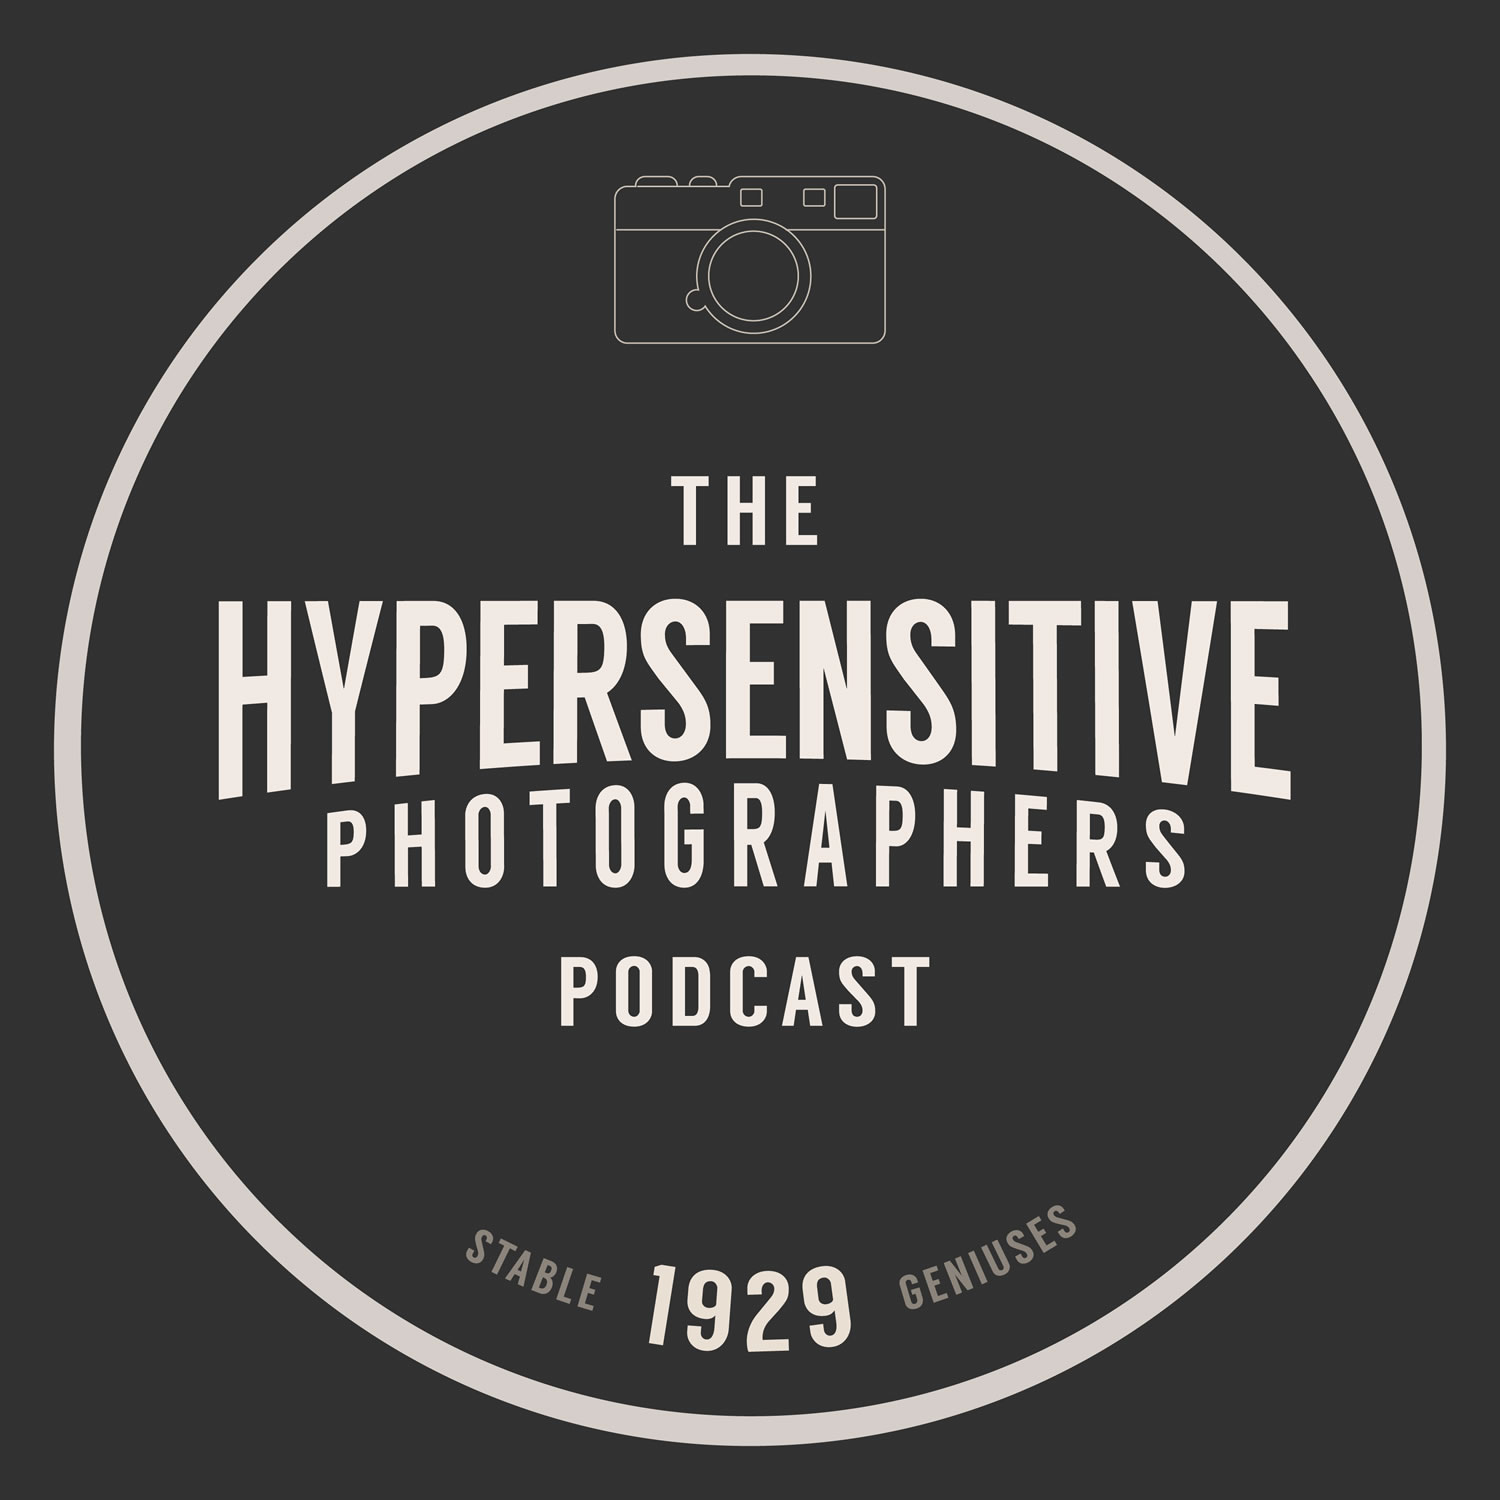 The Hypersensitive Podcast Episode 09: The “religion” of film, photographic self-indulgence and other musings…